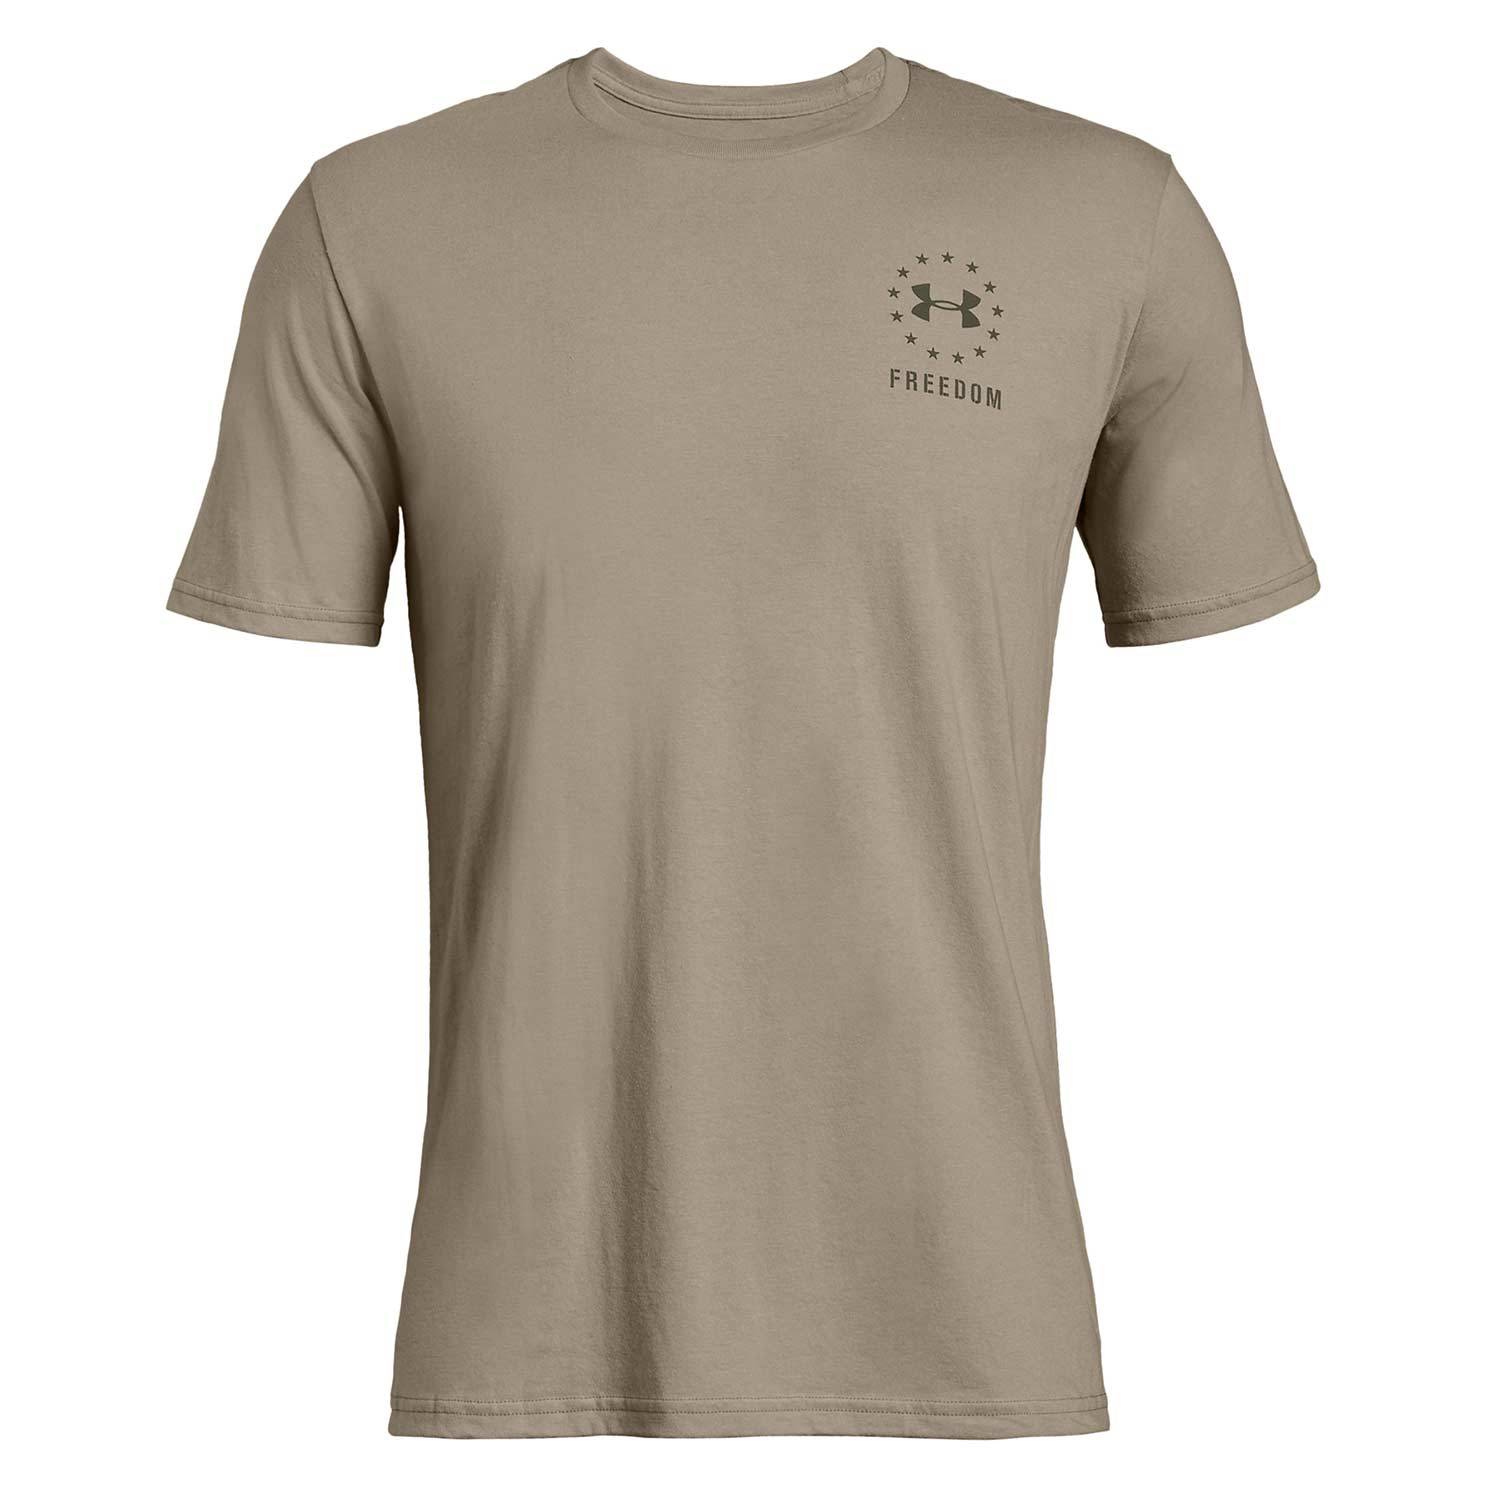 Under Armour Freedom Left Chest Graphic T-Shirt